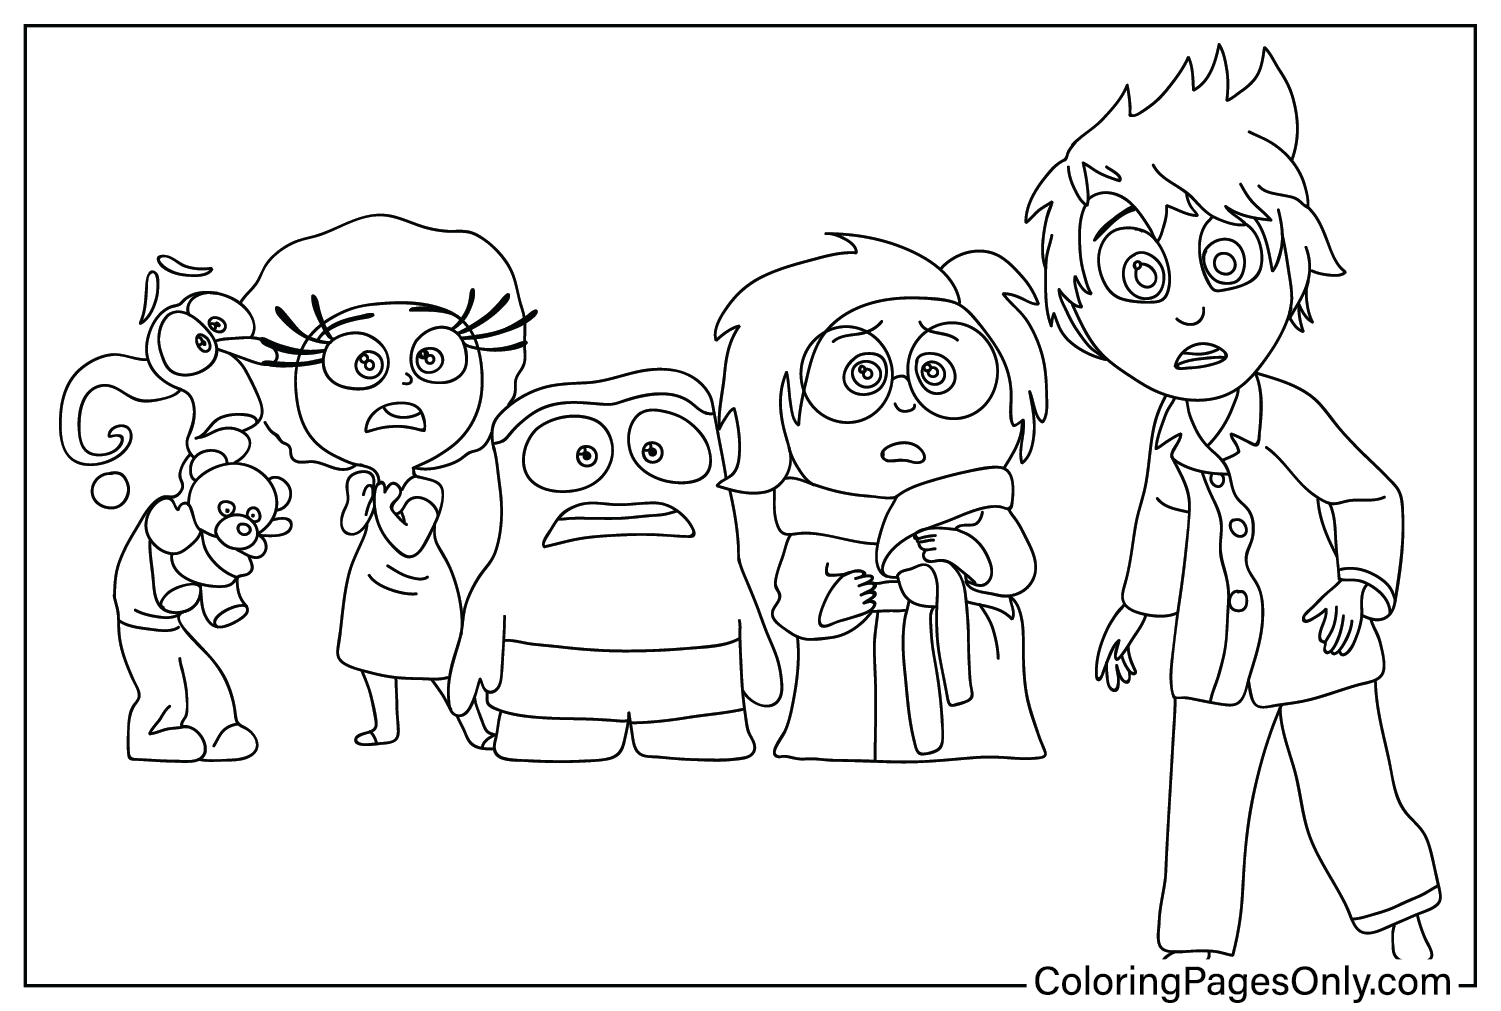 Inside Out 2 Coloring Page from Inside Out 2